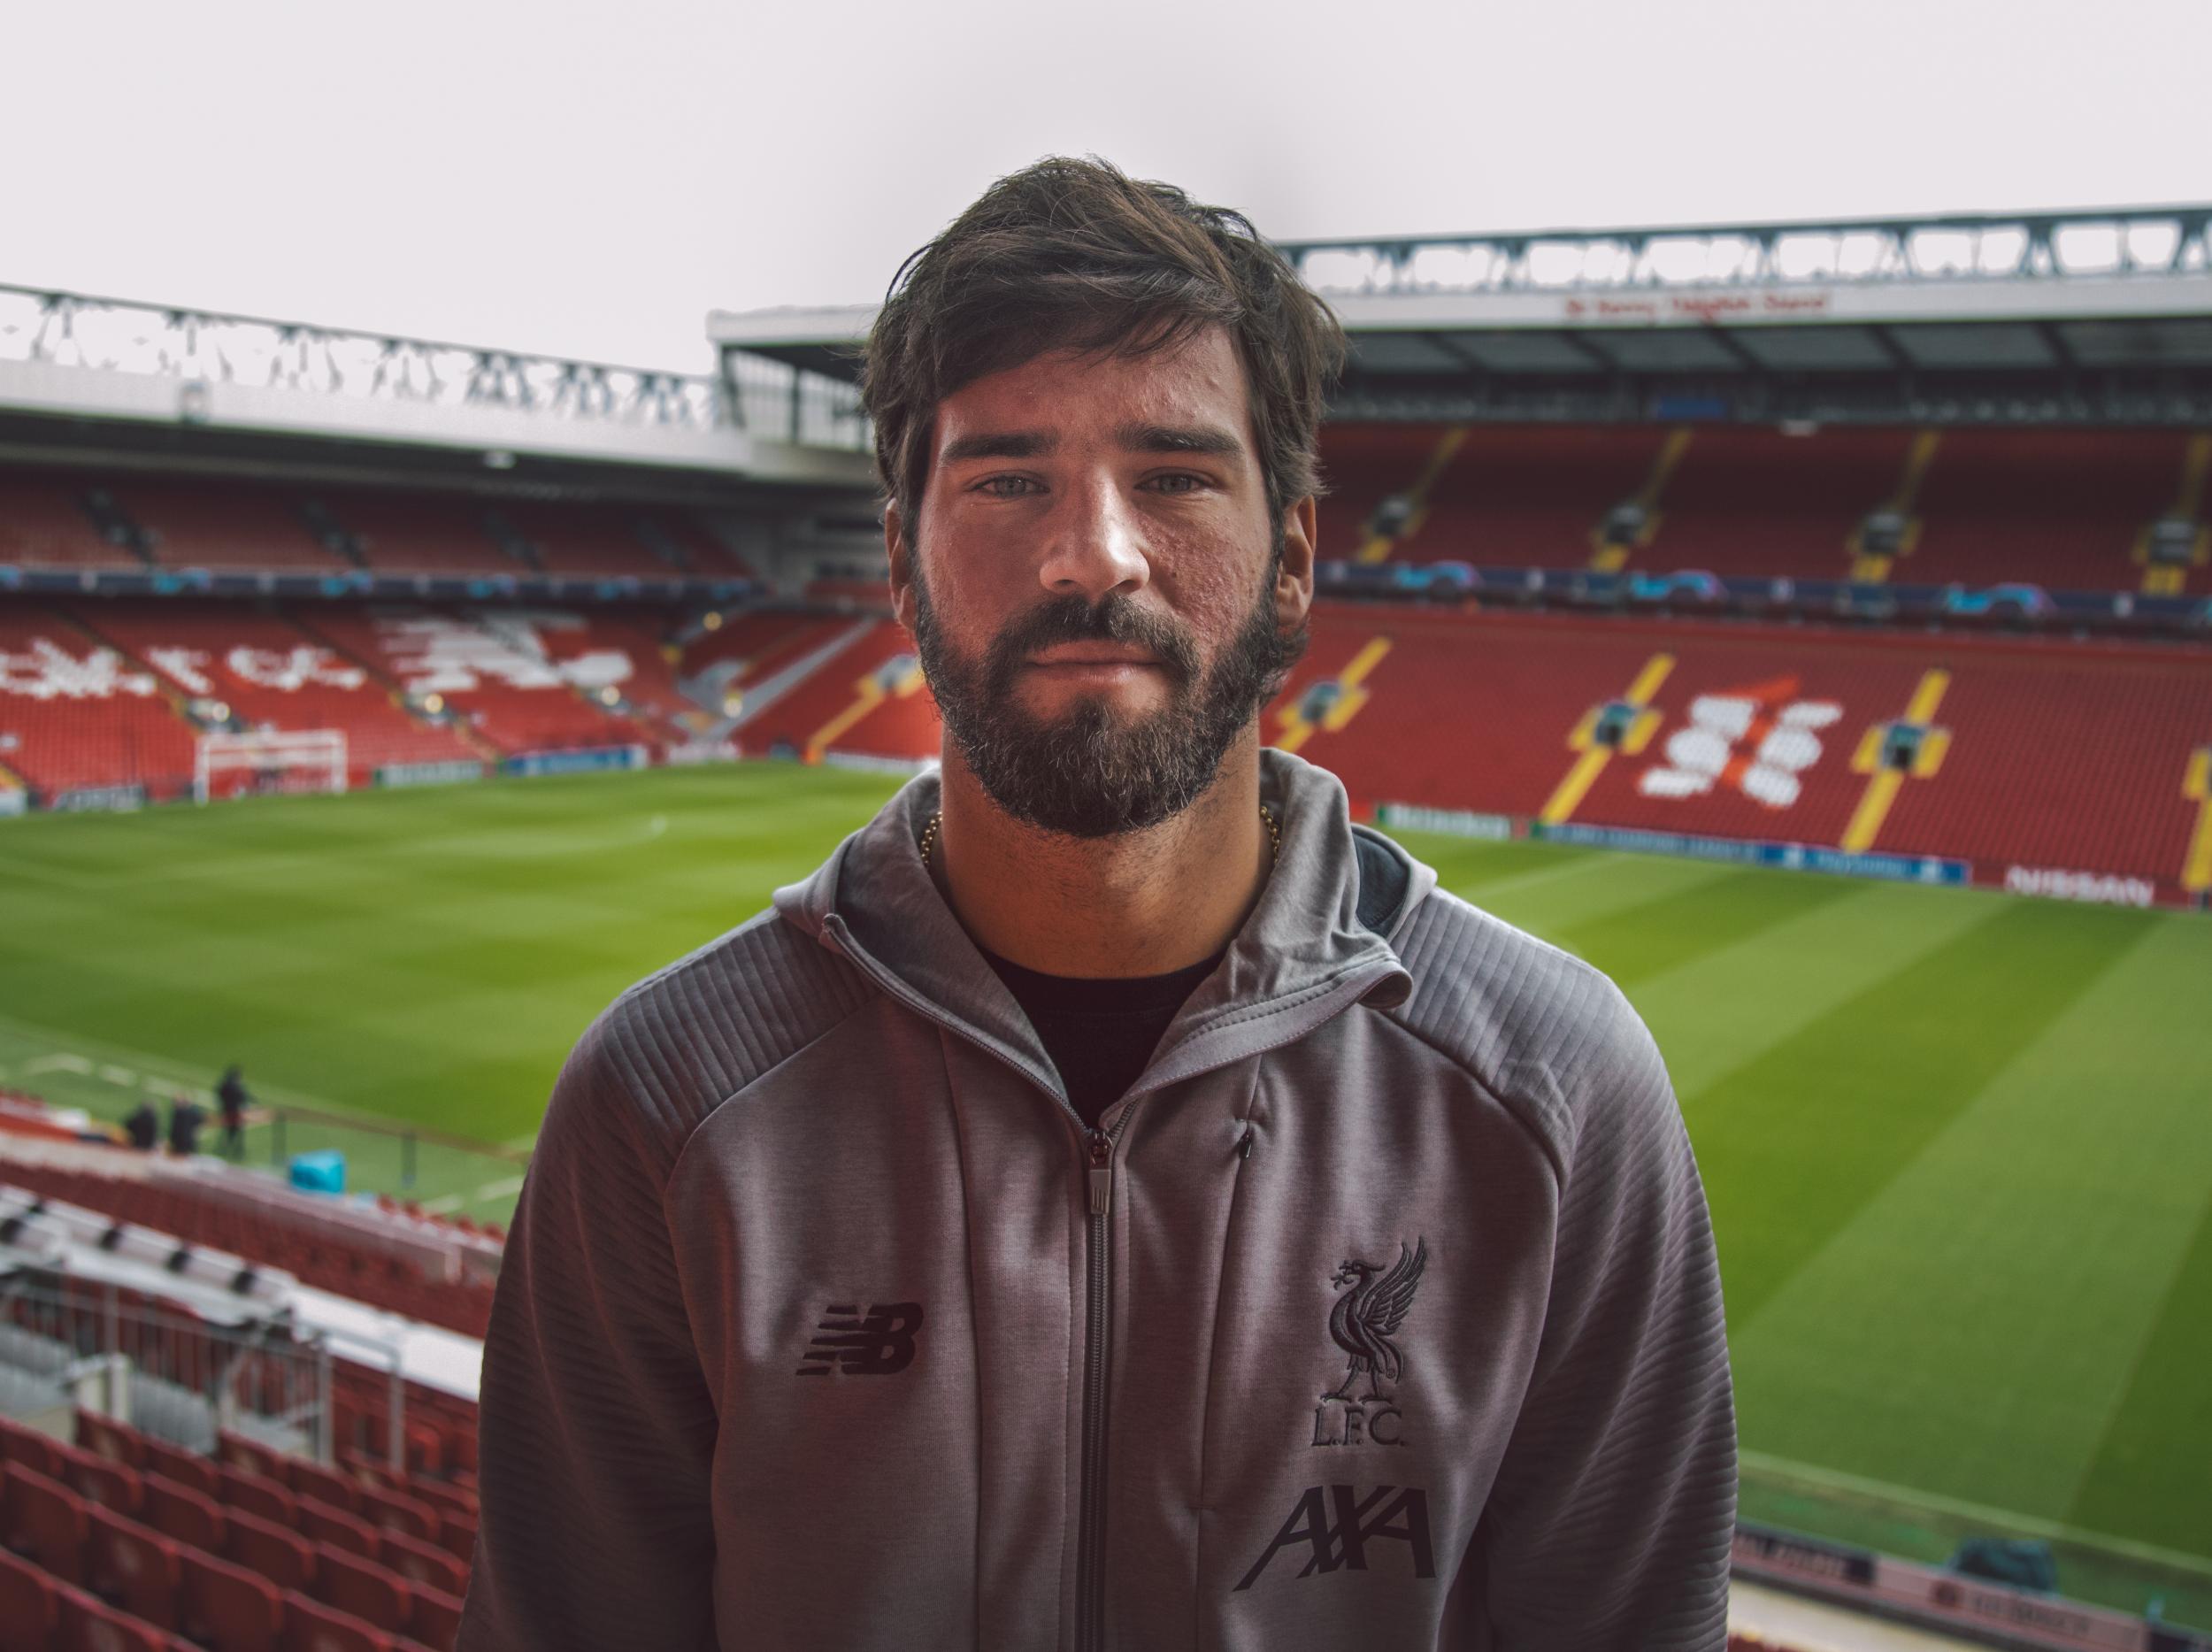 Alisson is in his second season at Liverpool